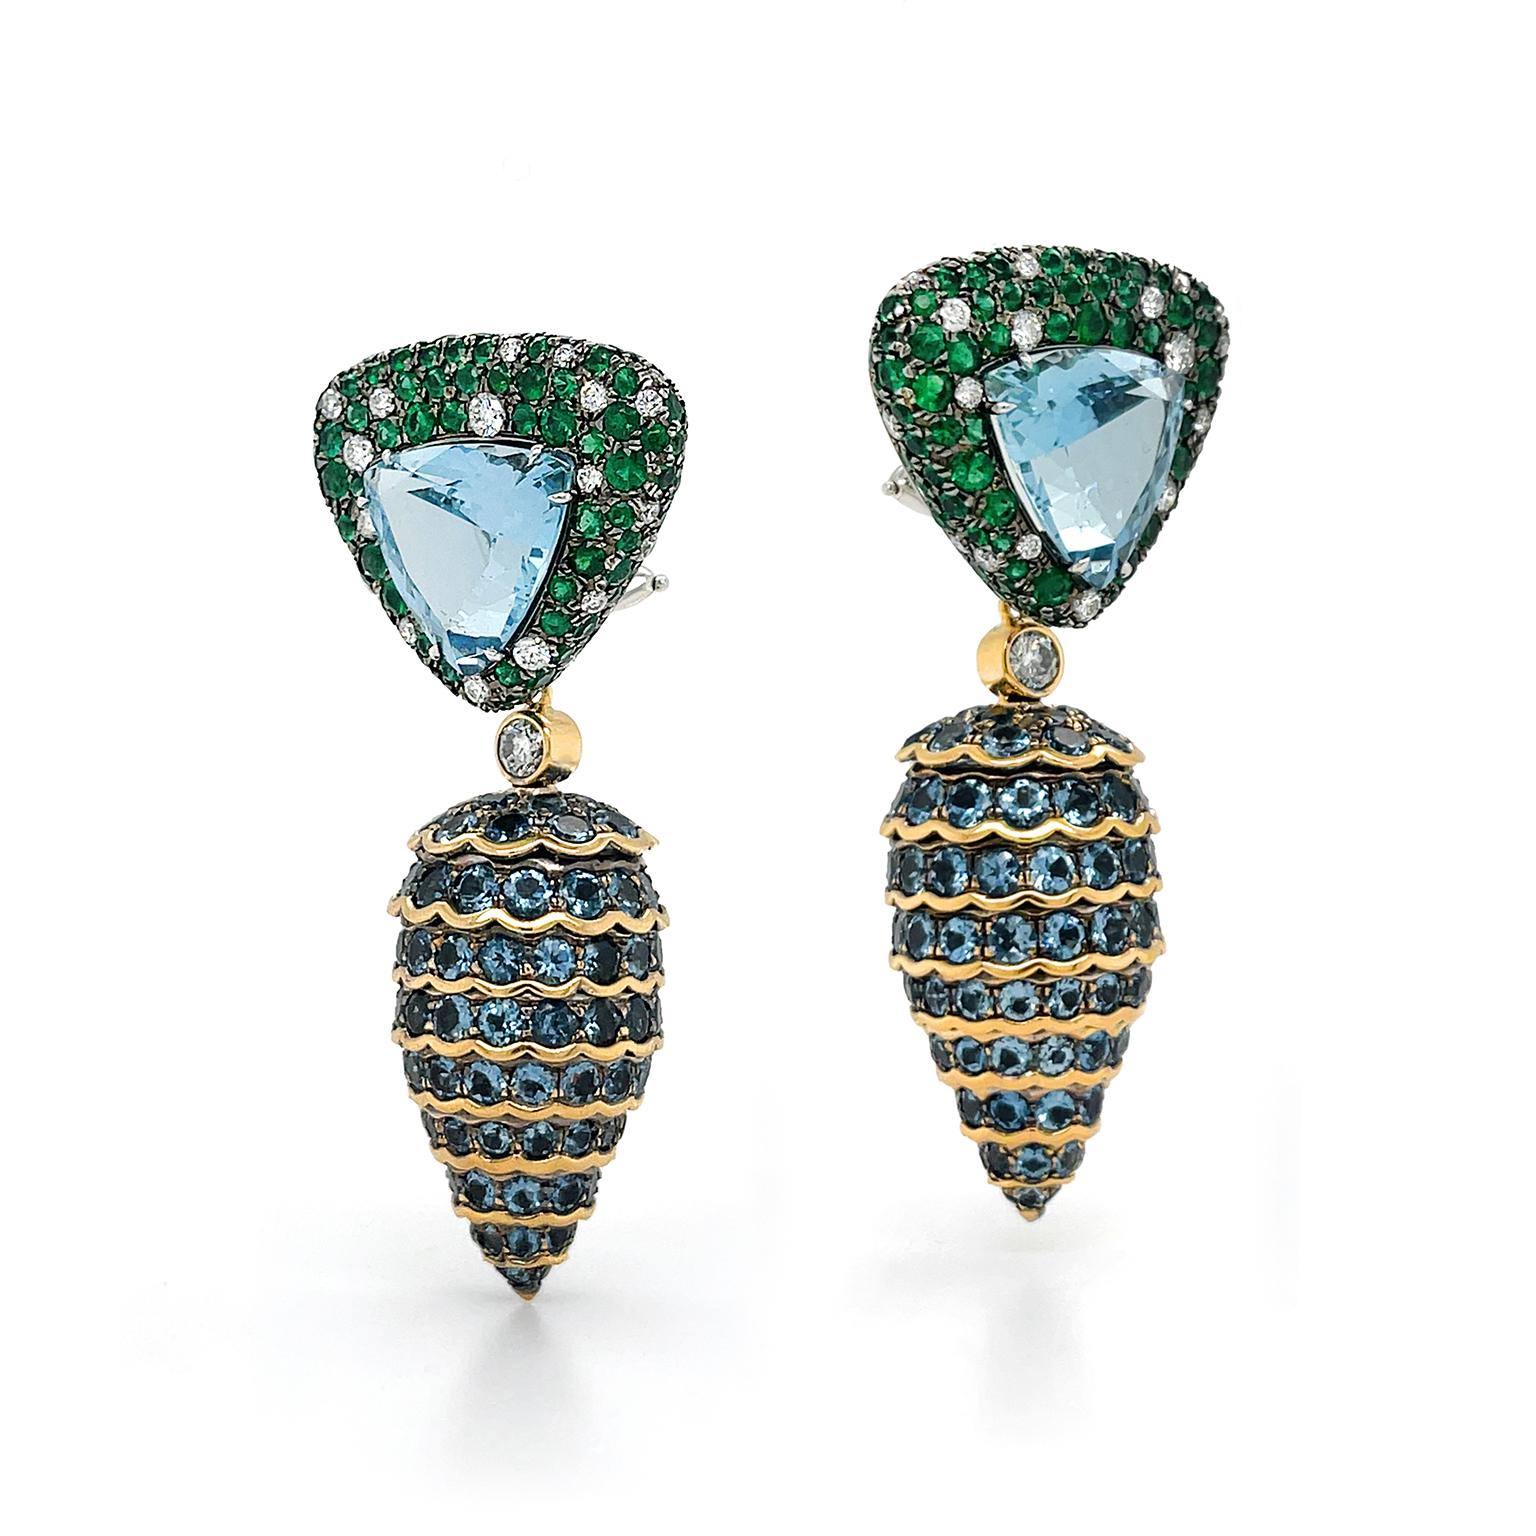 A trio of jewels create these versatile pine cone earrings. Beginning with a triangle pointed downward, a trillion-cut aquamarine beams in the center as emeralds with dispersed brilliant cut diamonds surround it. Next, a single diamond bezel set in